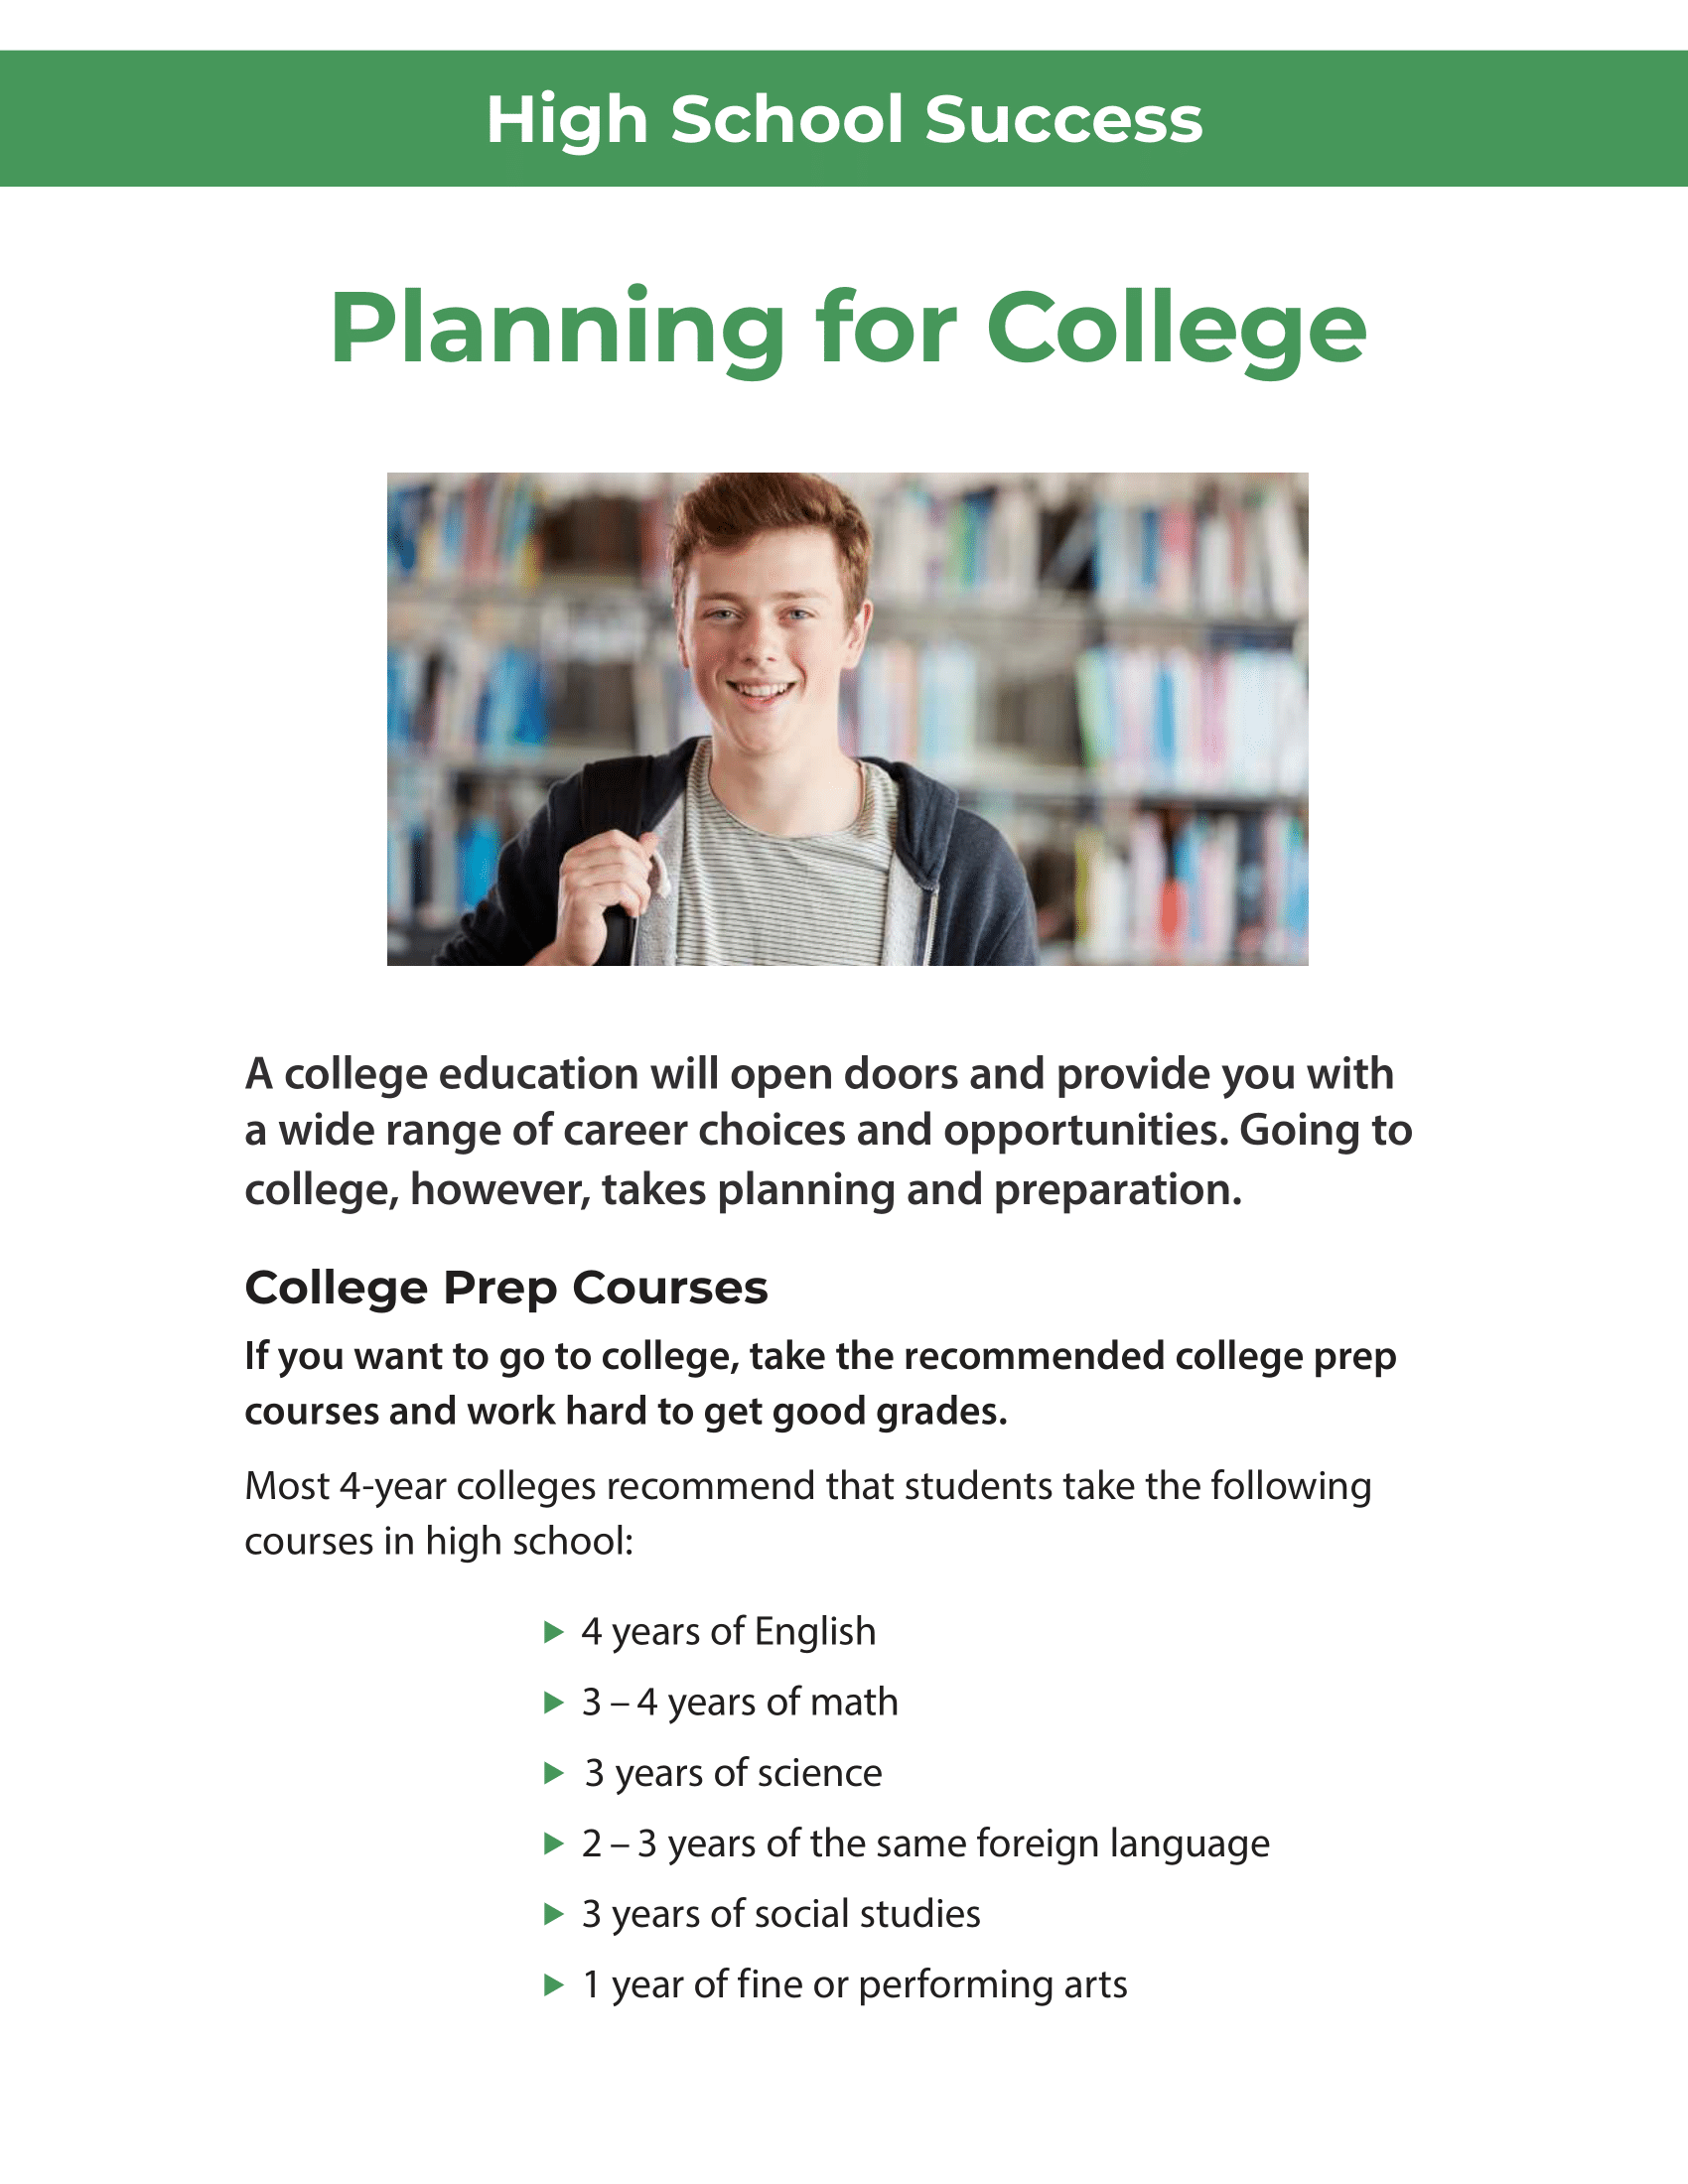 High School Success - Planning for College